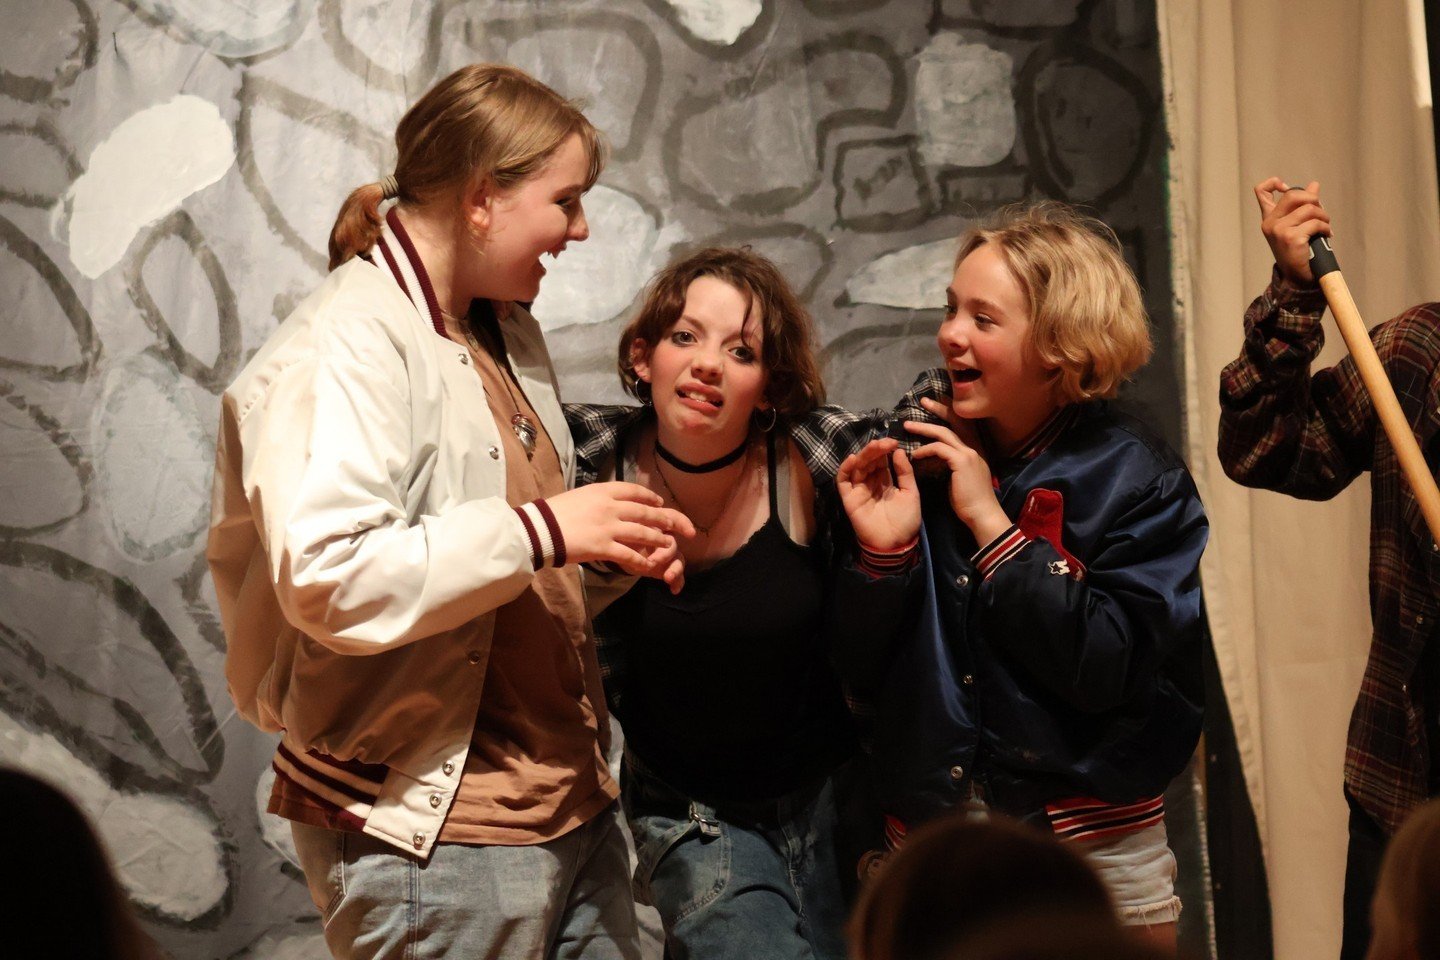 Come this afternoon to see our Middle School's production of &quot;Momo and the Thieves of Time.&quot; Their opening night performance delighted and spooked us!⁠
⁠
4pm, Saturday May 11th in the Ithaca Waldorf School Great Room⁠
⁠
There's a &quot;play